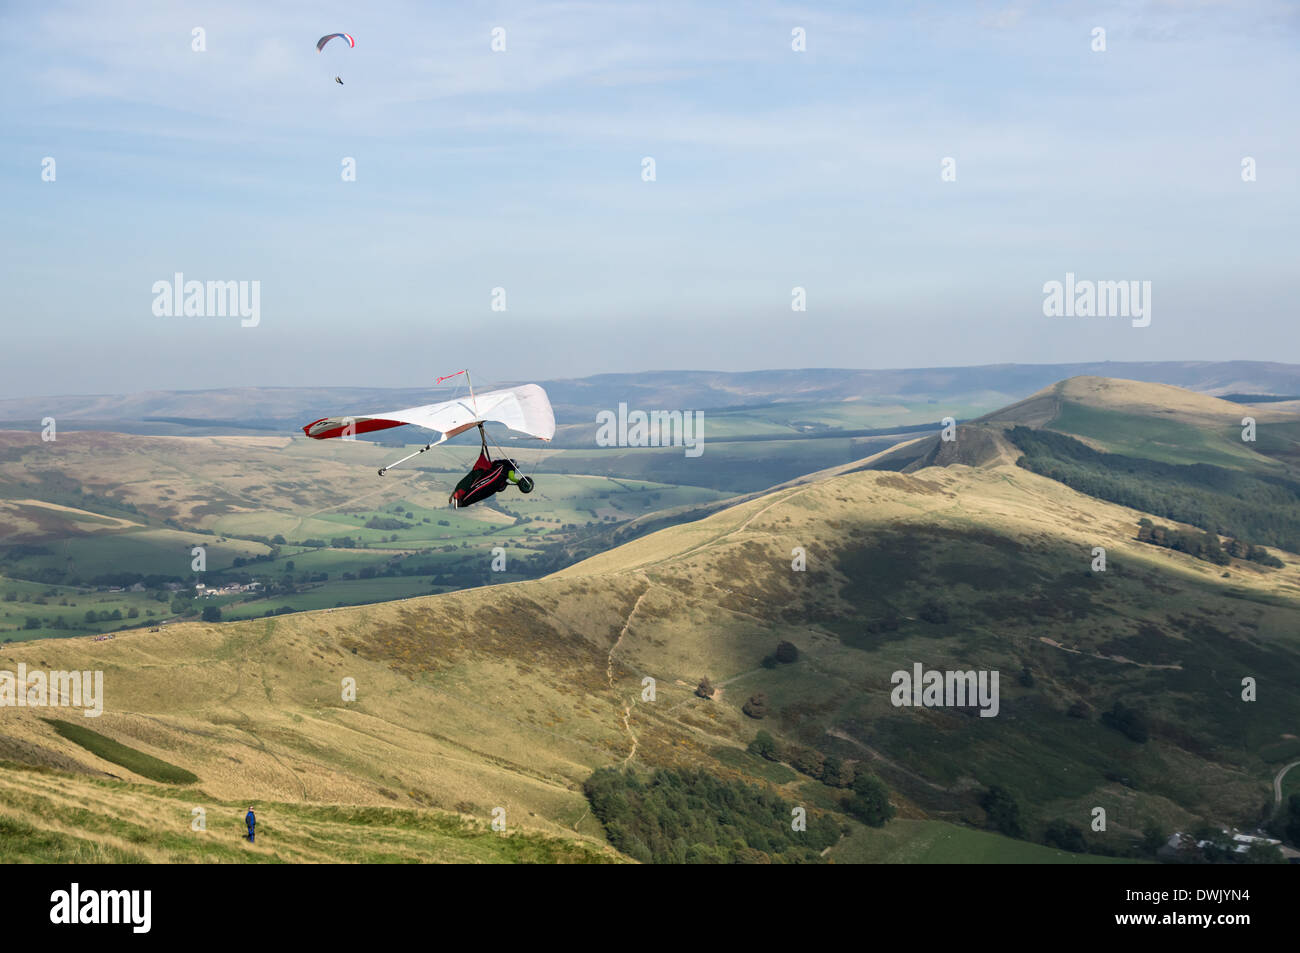 Two men hang gliding over the Hope Valley in Peak District National Park Derbyshire England United Kingdom UK Stock Photo